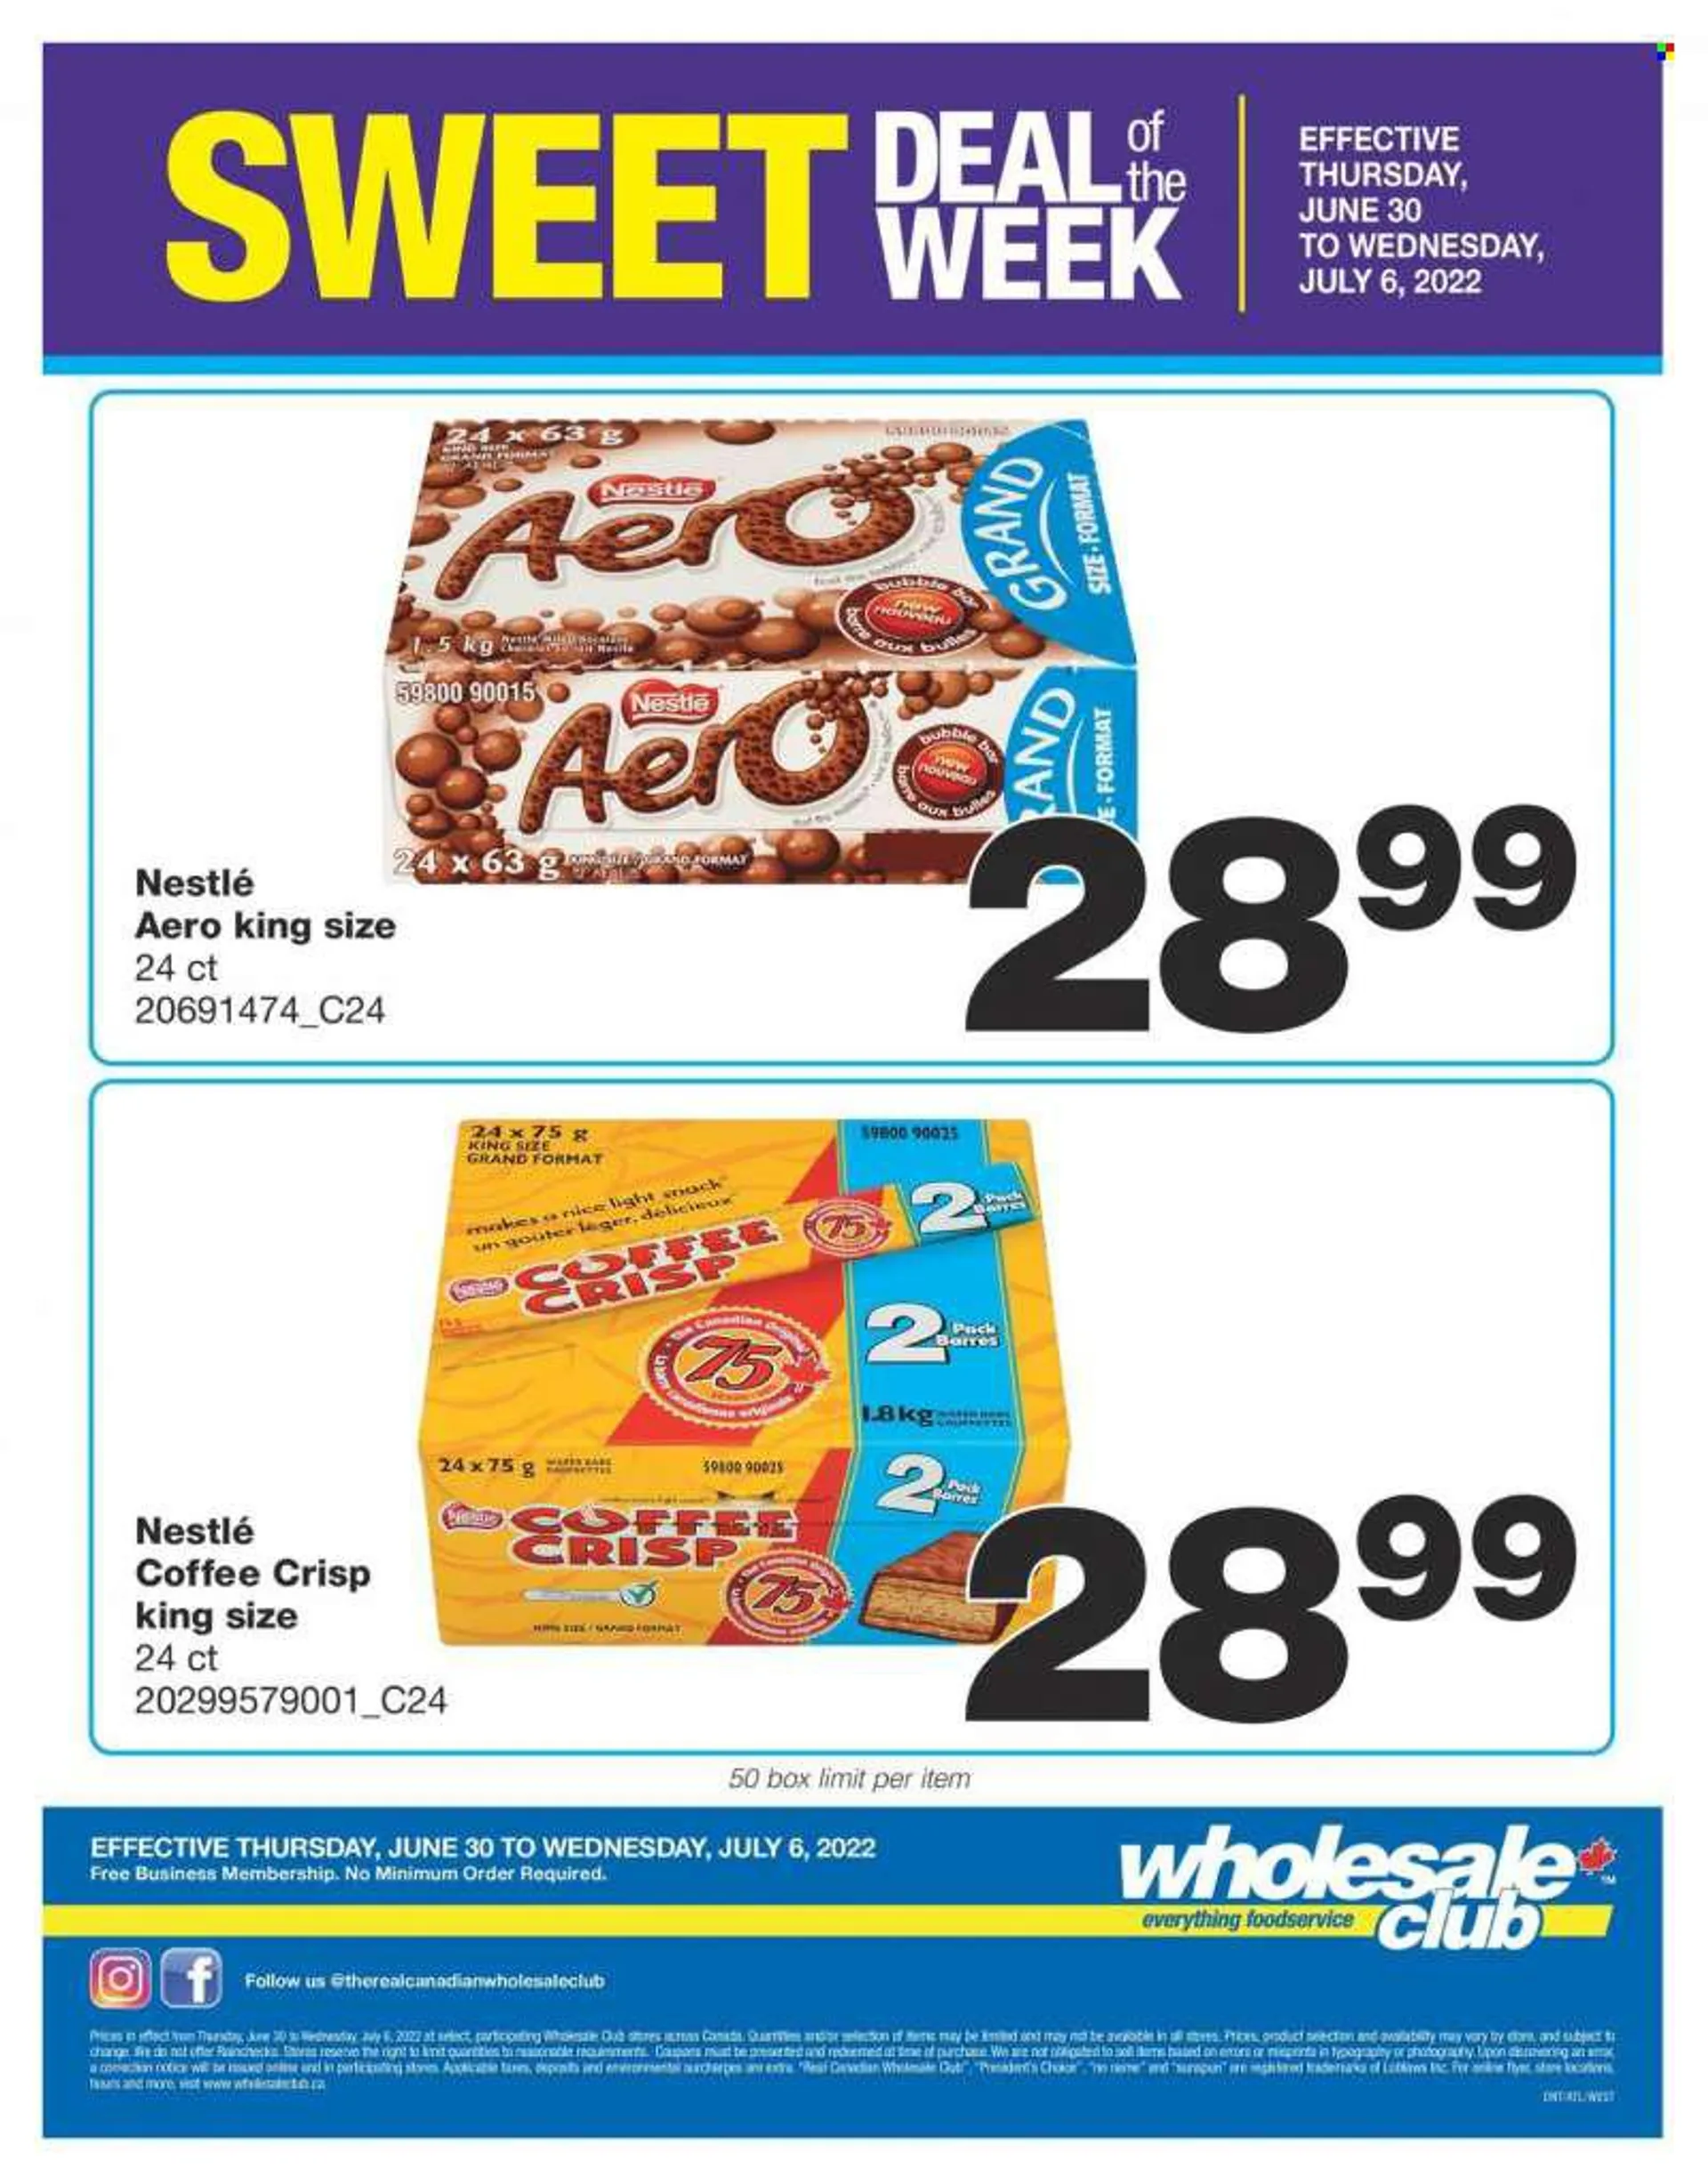 Wholesale Club Flyer - June 30, 2022 - July 06, 2022 - Sales products - No Name, Président, milk chocolate, chocolate, snack, coffee, Nestlé. Page 1.